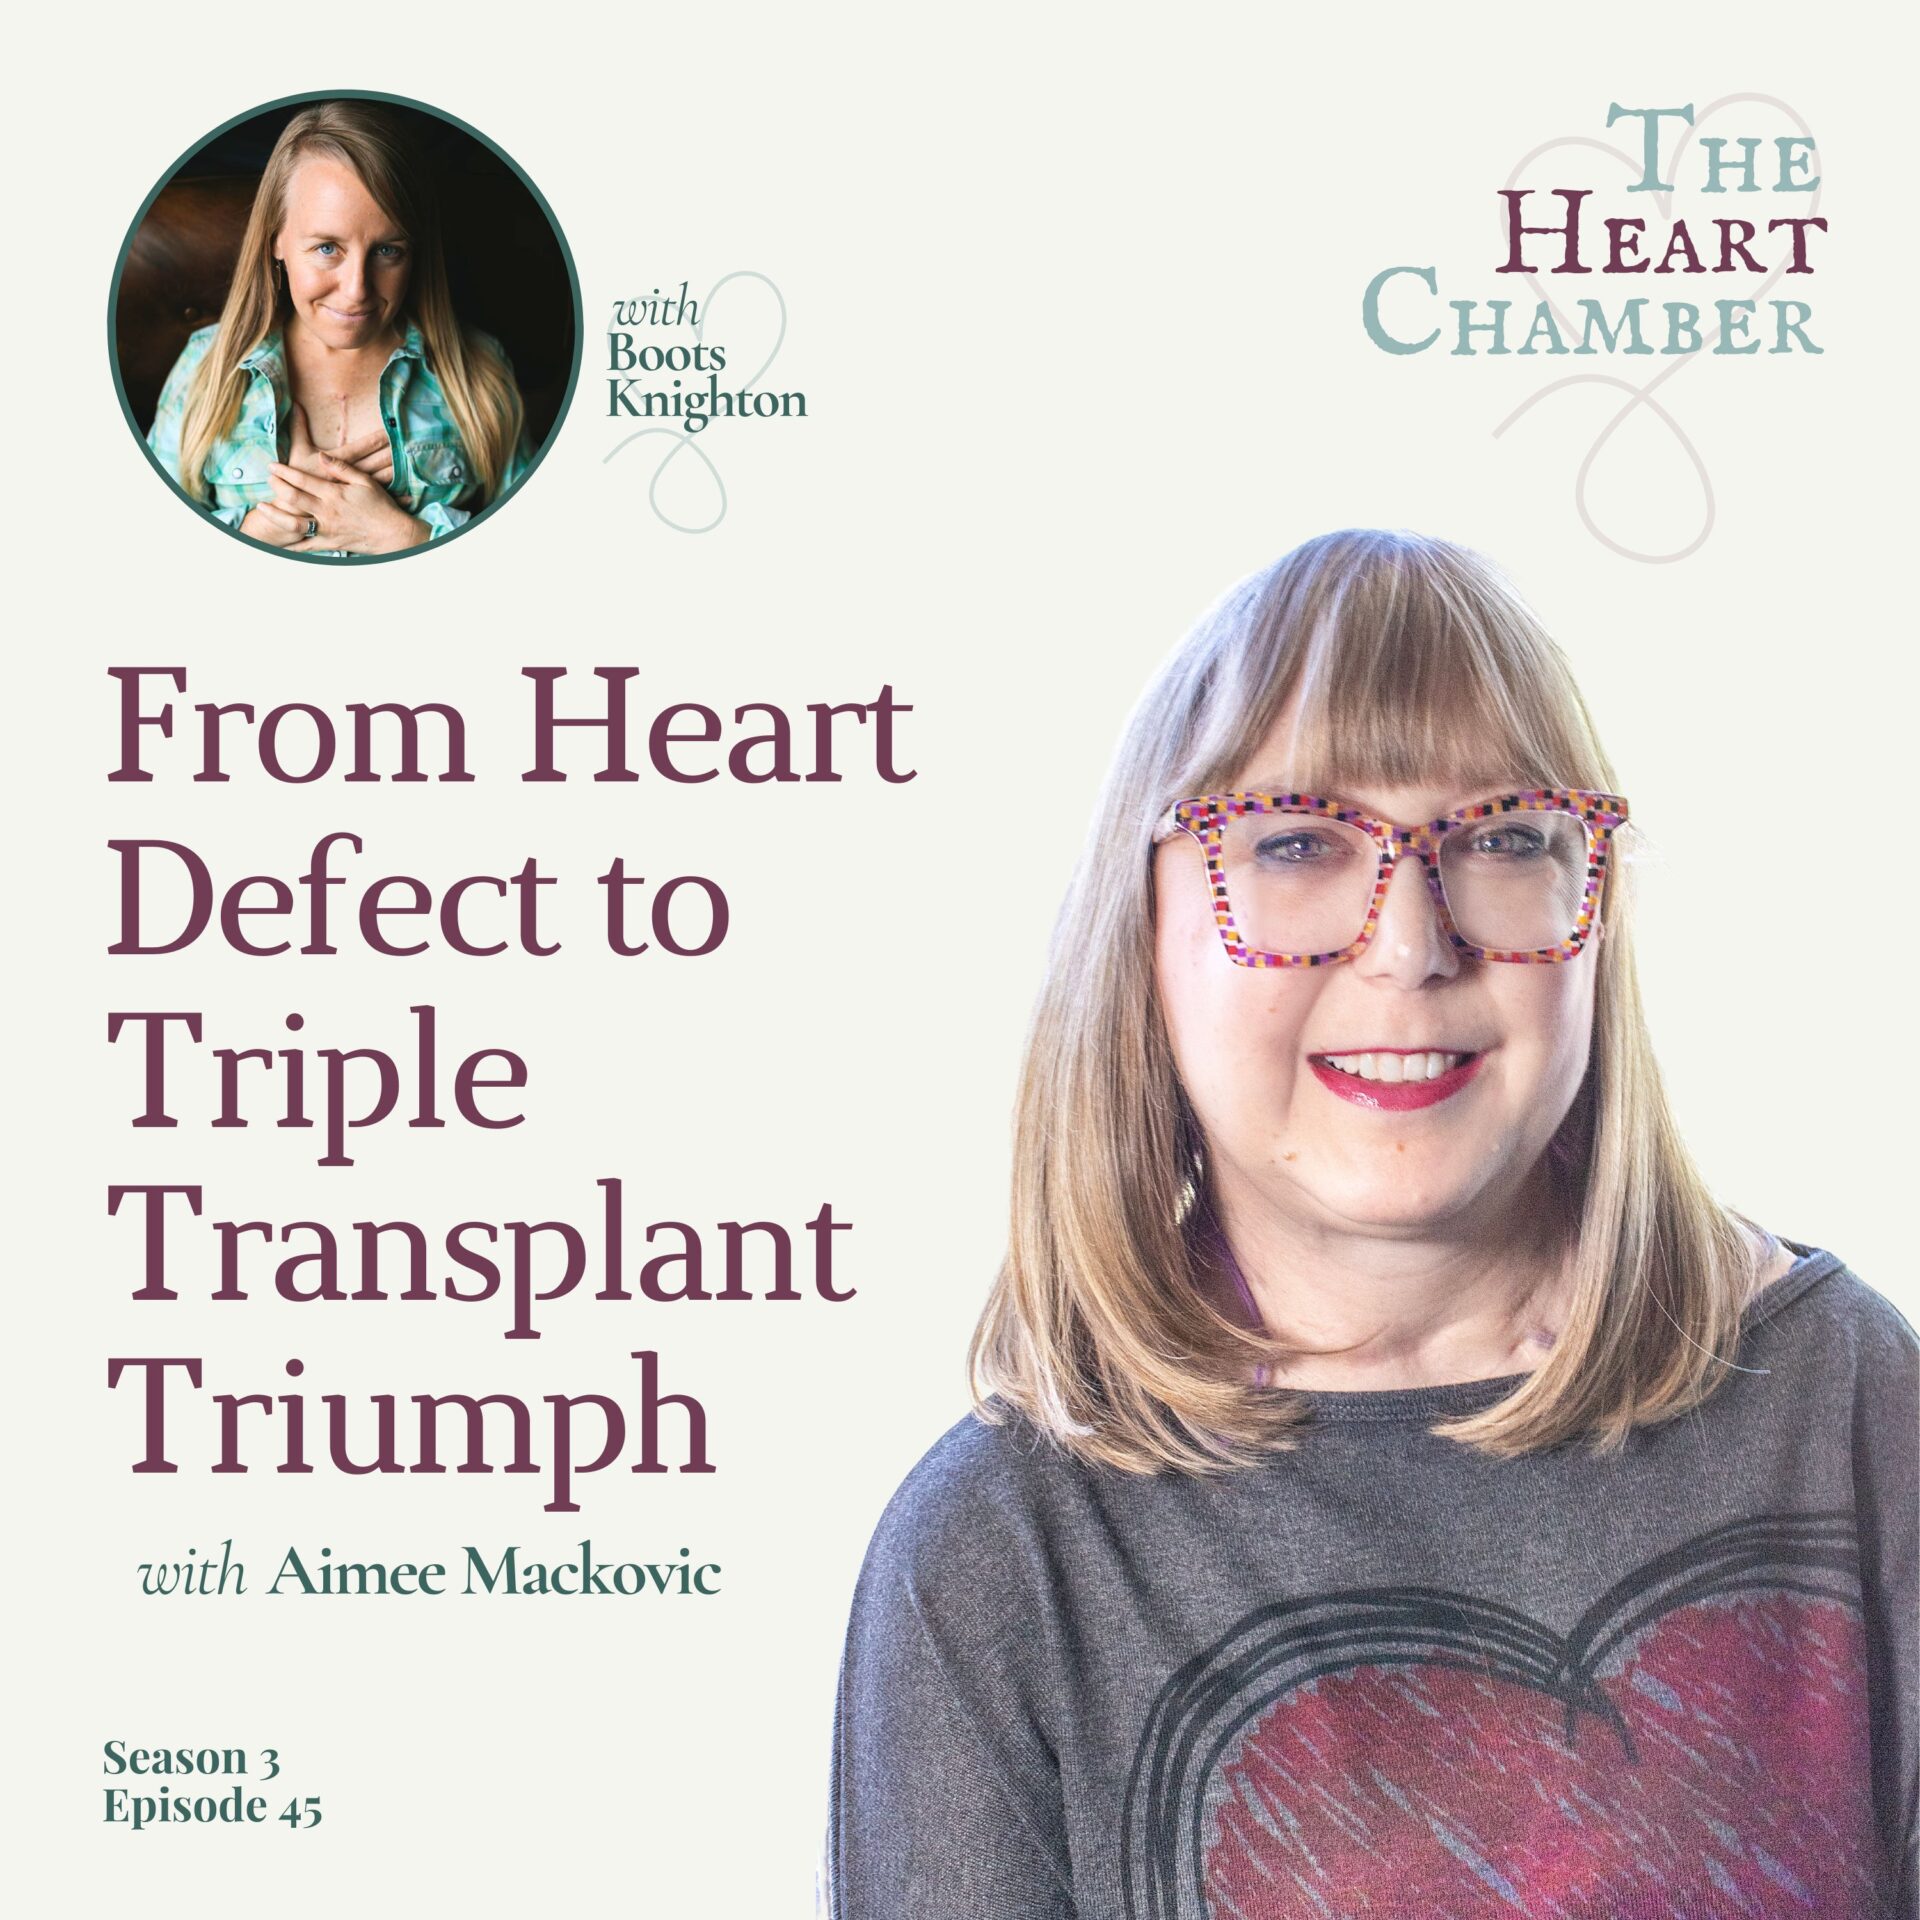 From Heart Defect to Triple Transplant Triumph with Aimee Mackovic -45